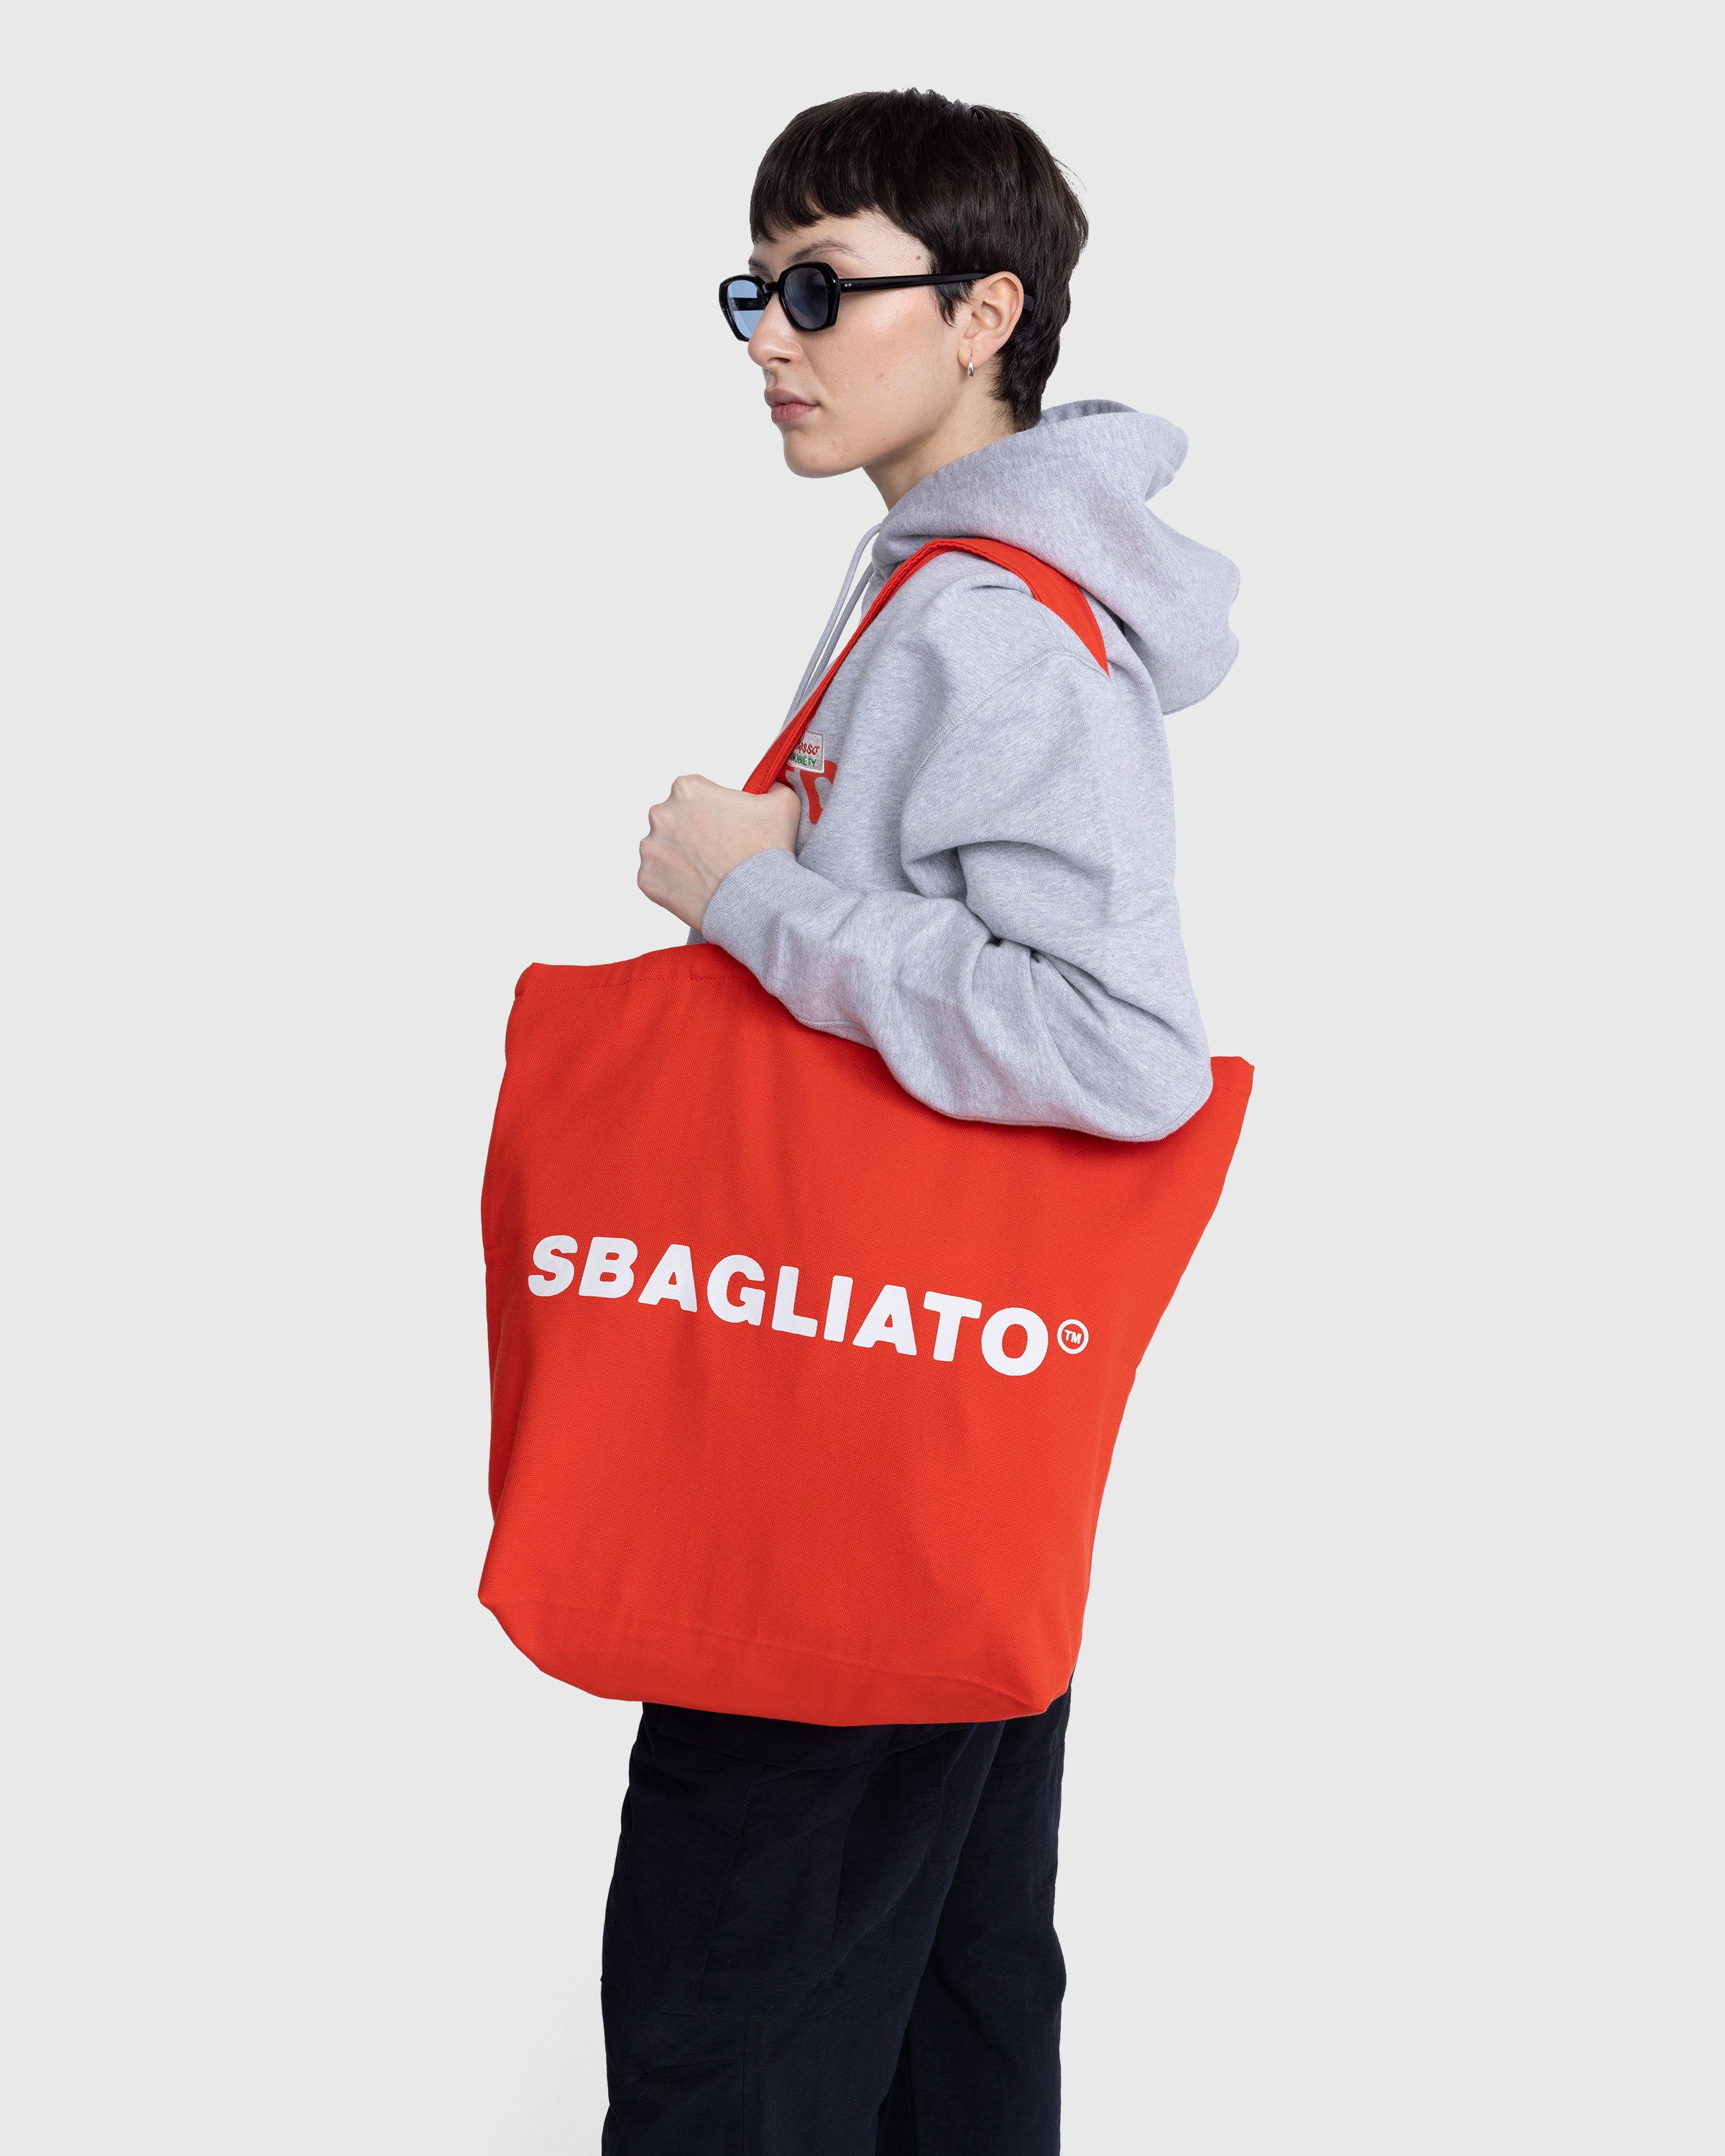 Bar Basso x Highsnobiety - Sbagliato Tote Bag Red - Accessories - Red - Image 4